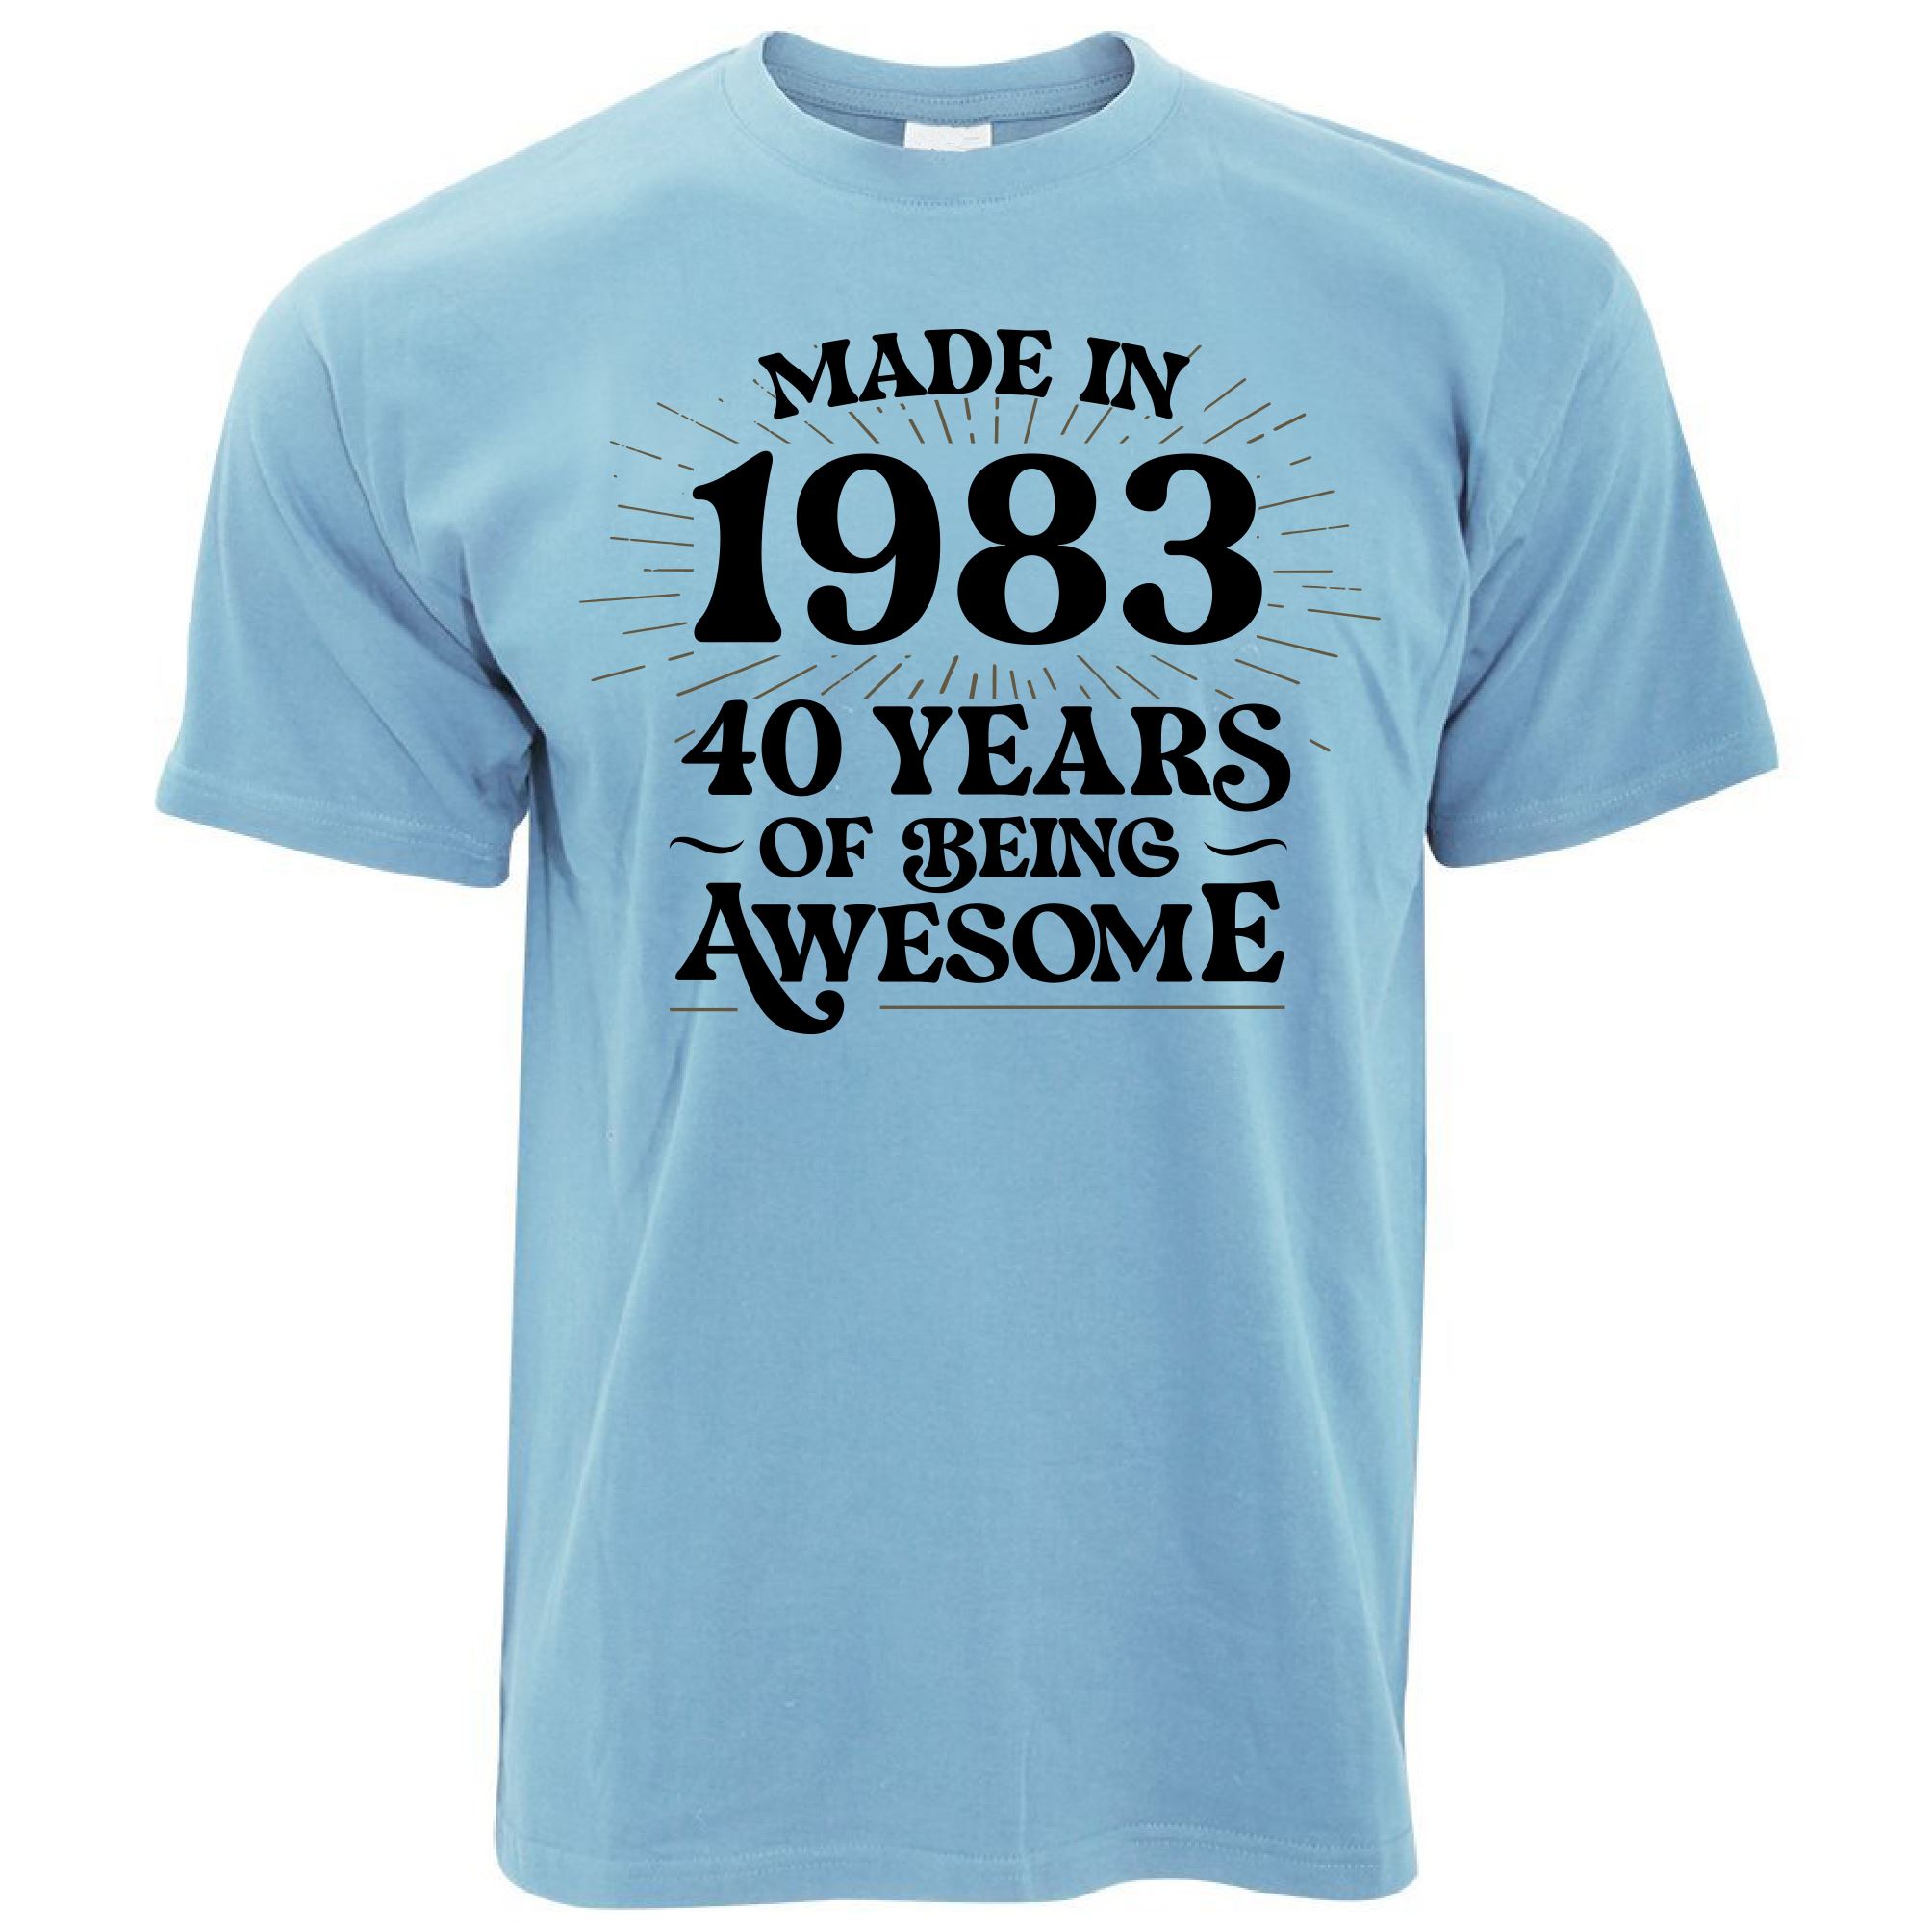 40th Birthday T Shirt Made in 1983 - 40 Awesome Years